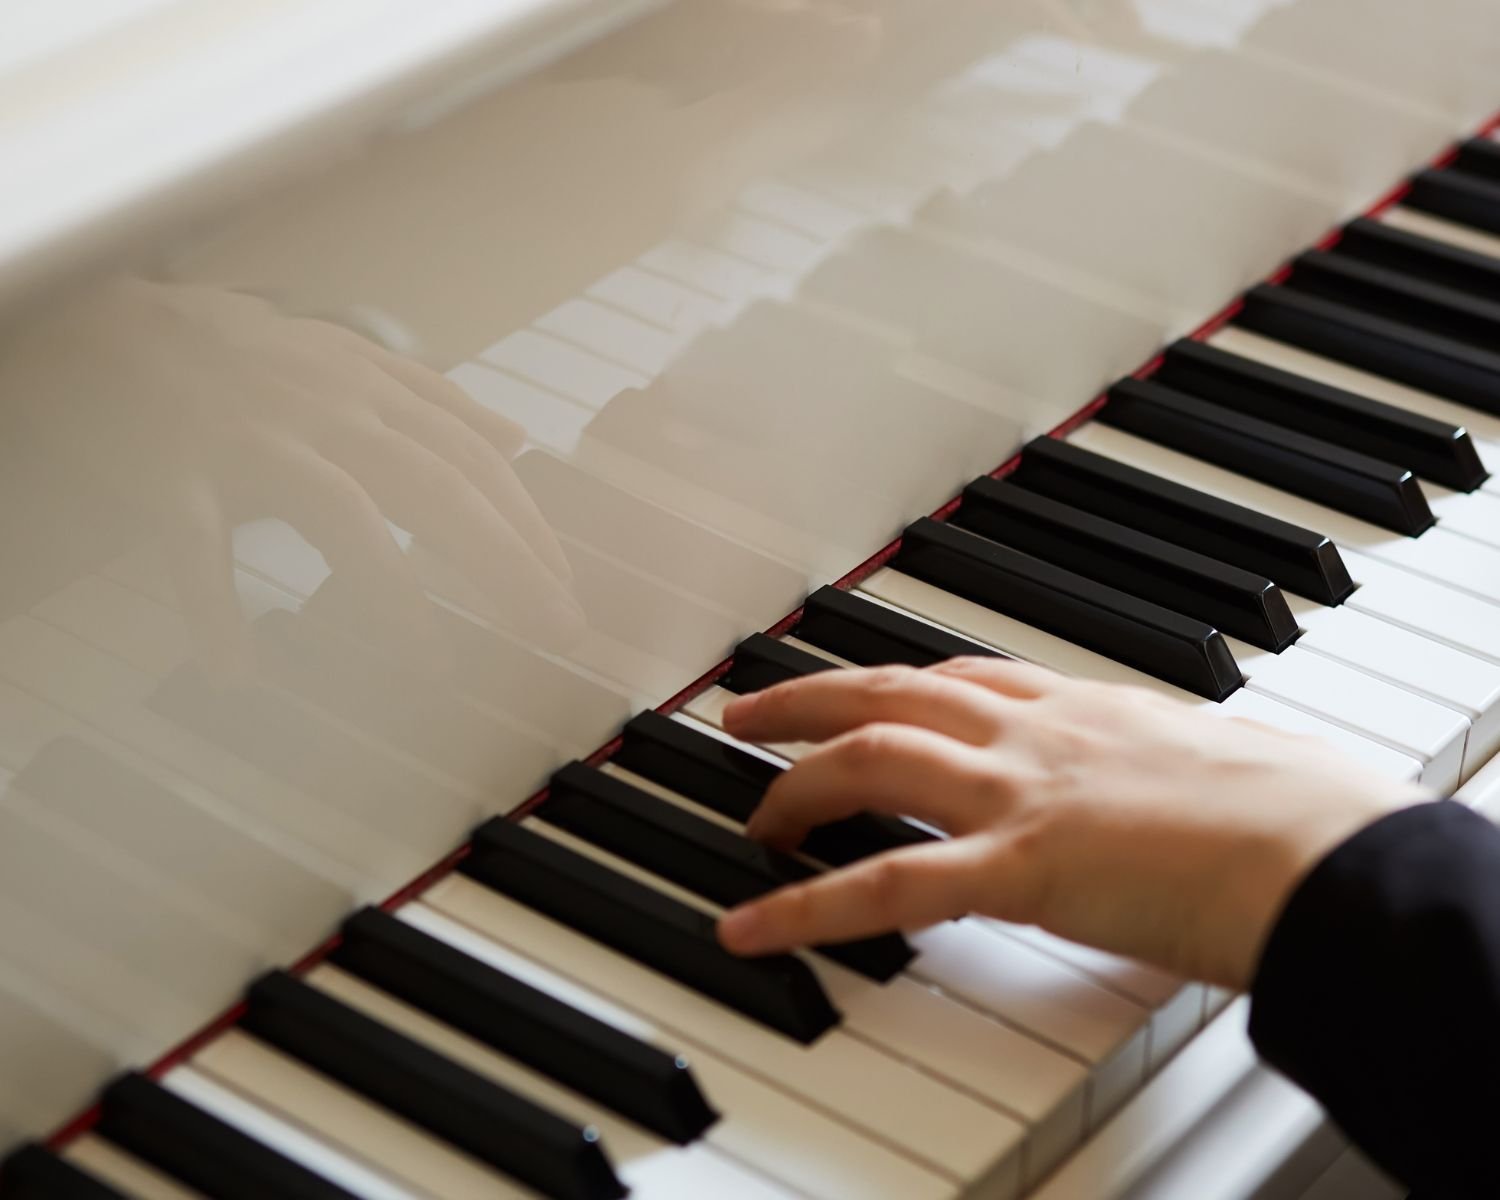 Digital piano, traditional piano or keyboard: how to make the right choice? 🎹